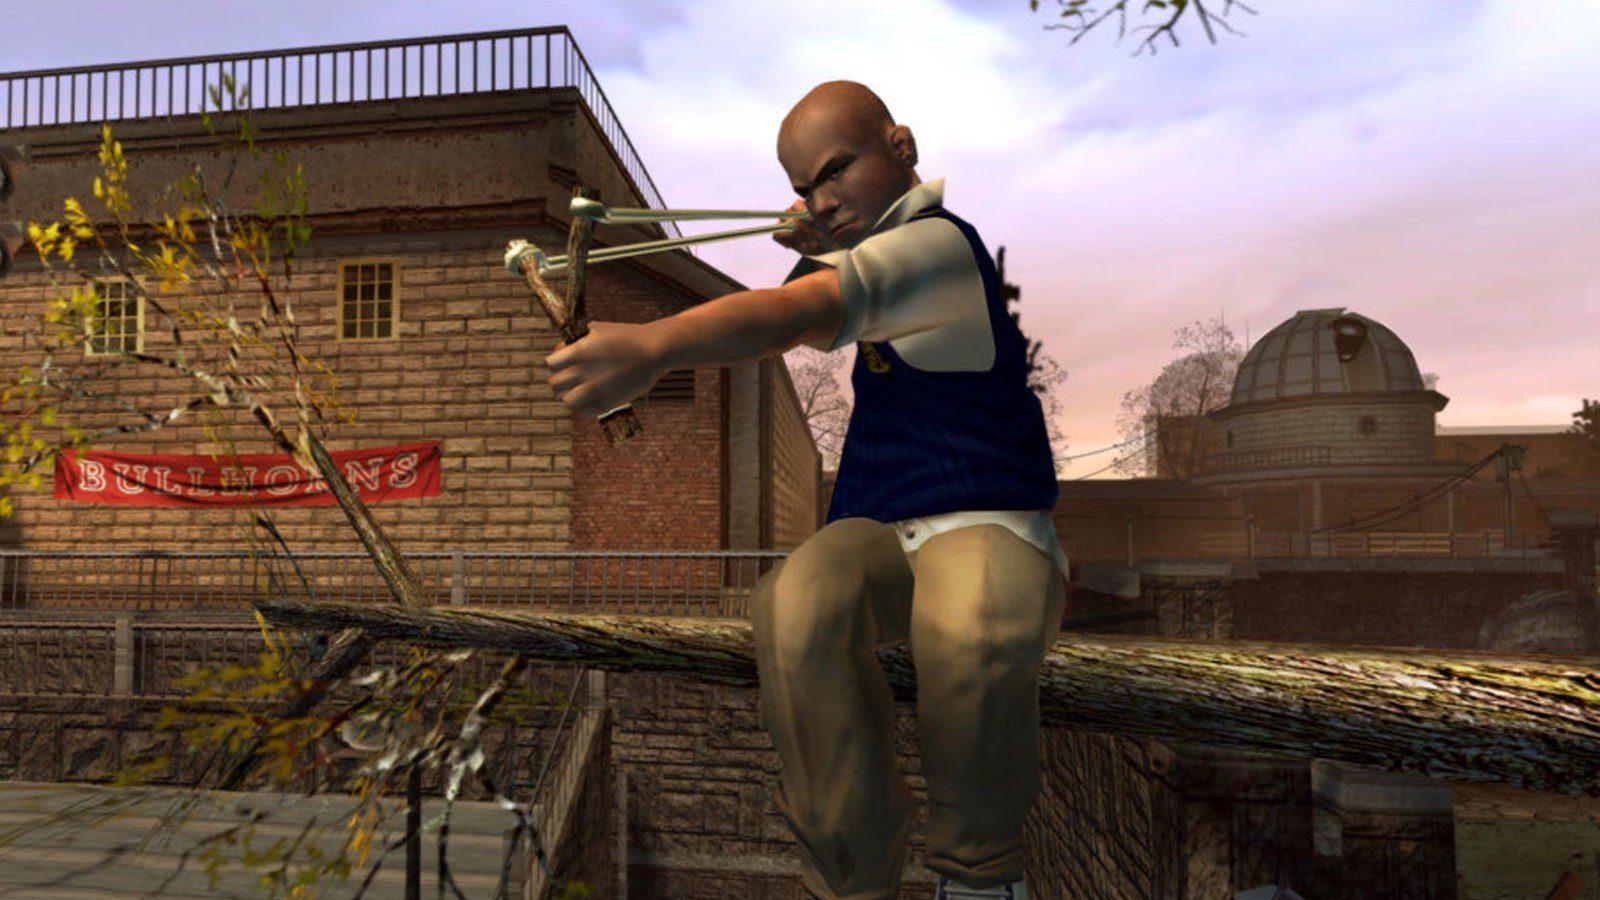 First Bully 2 gameplay screenshot apparently leaked, but is it real? -  Dexerto